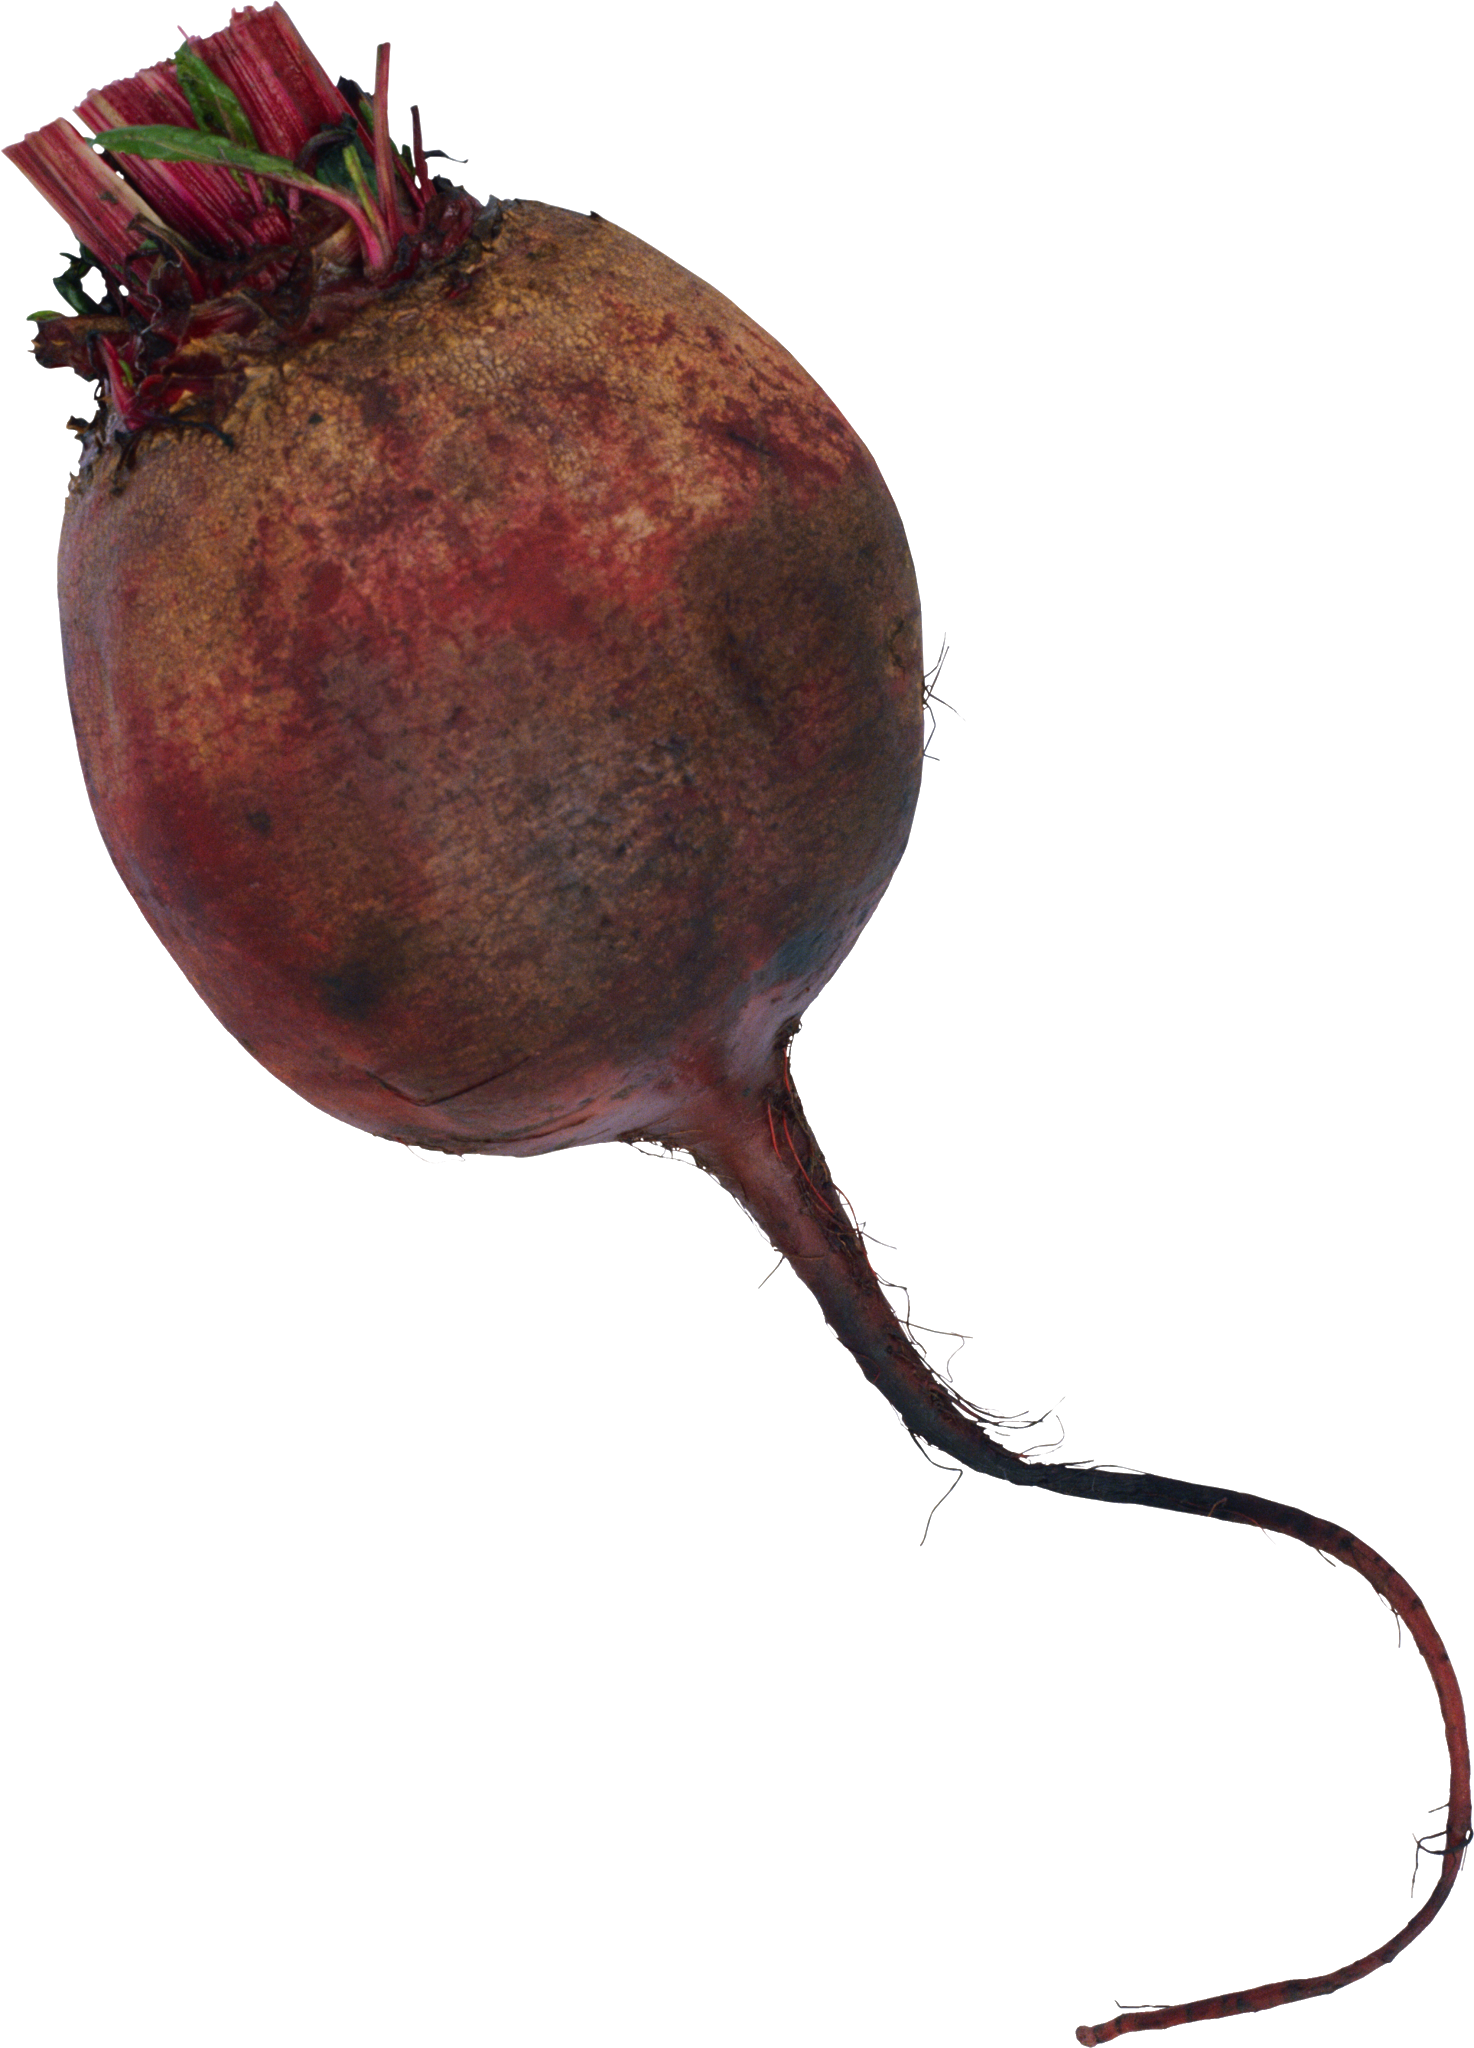 Beetroot Single PNG Image High Quality PNG Image